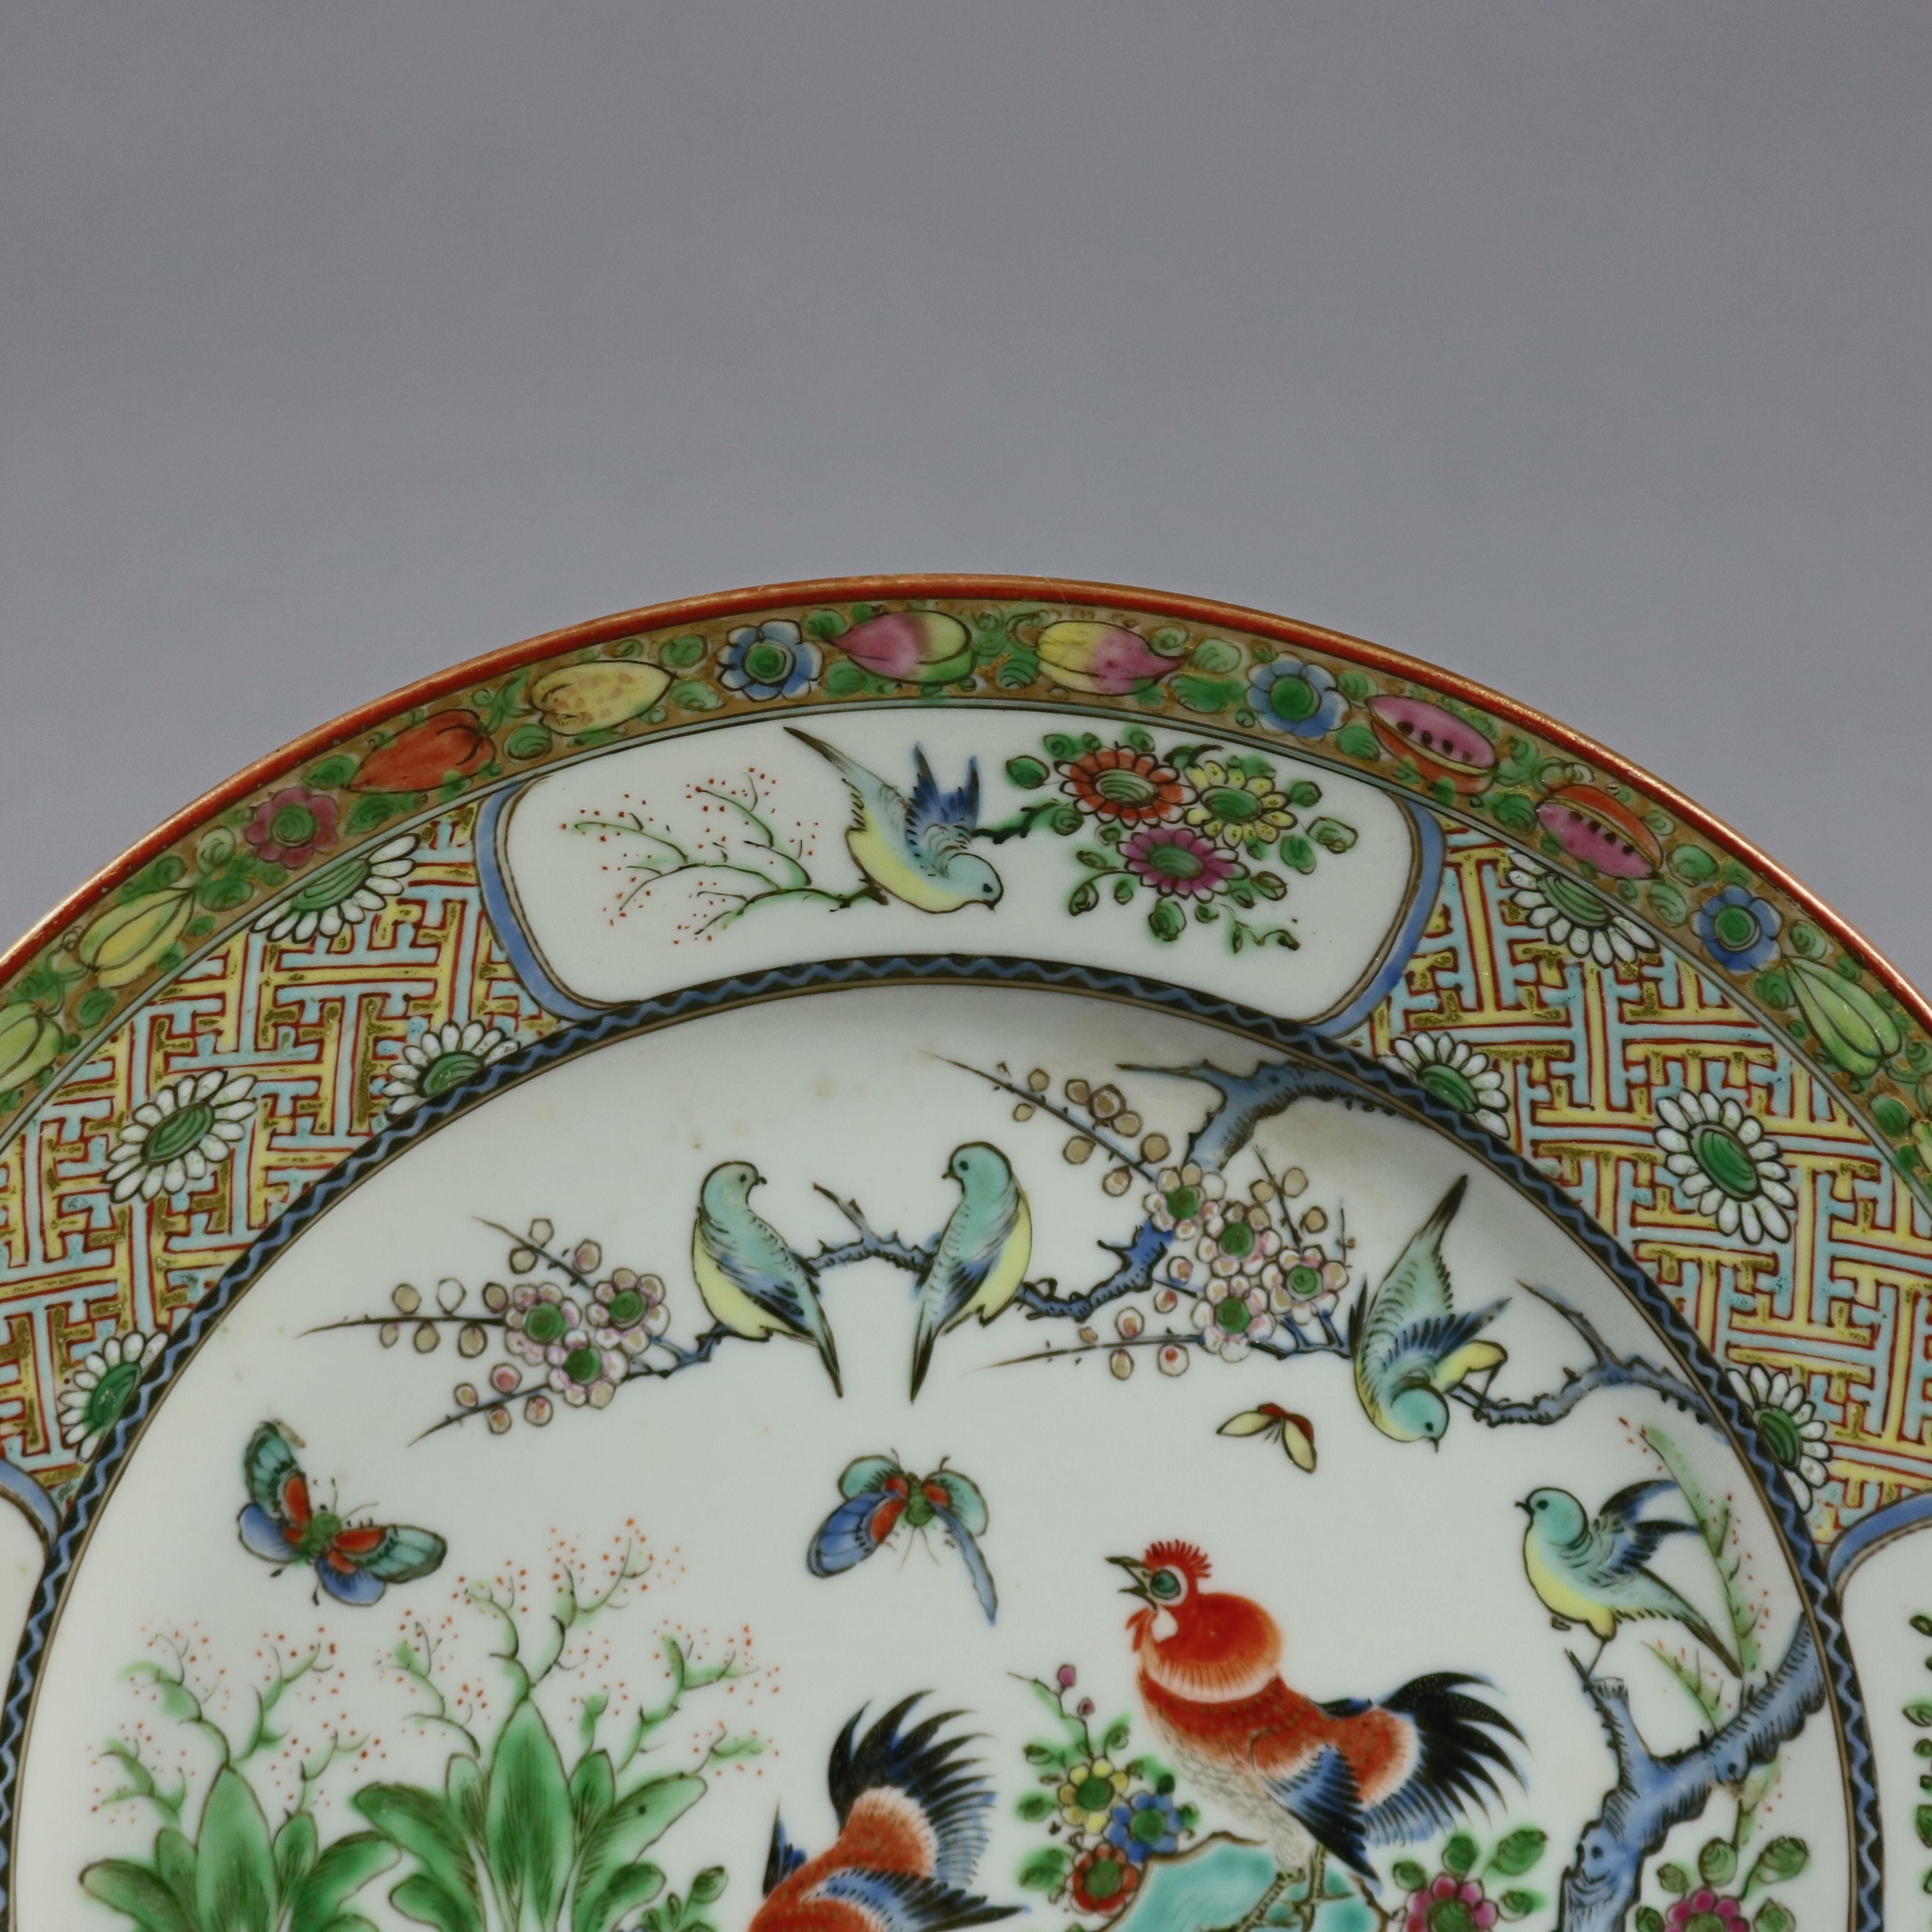 rooster plates for sale